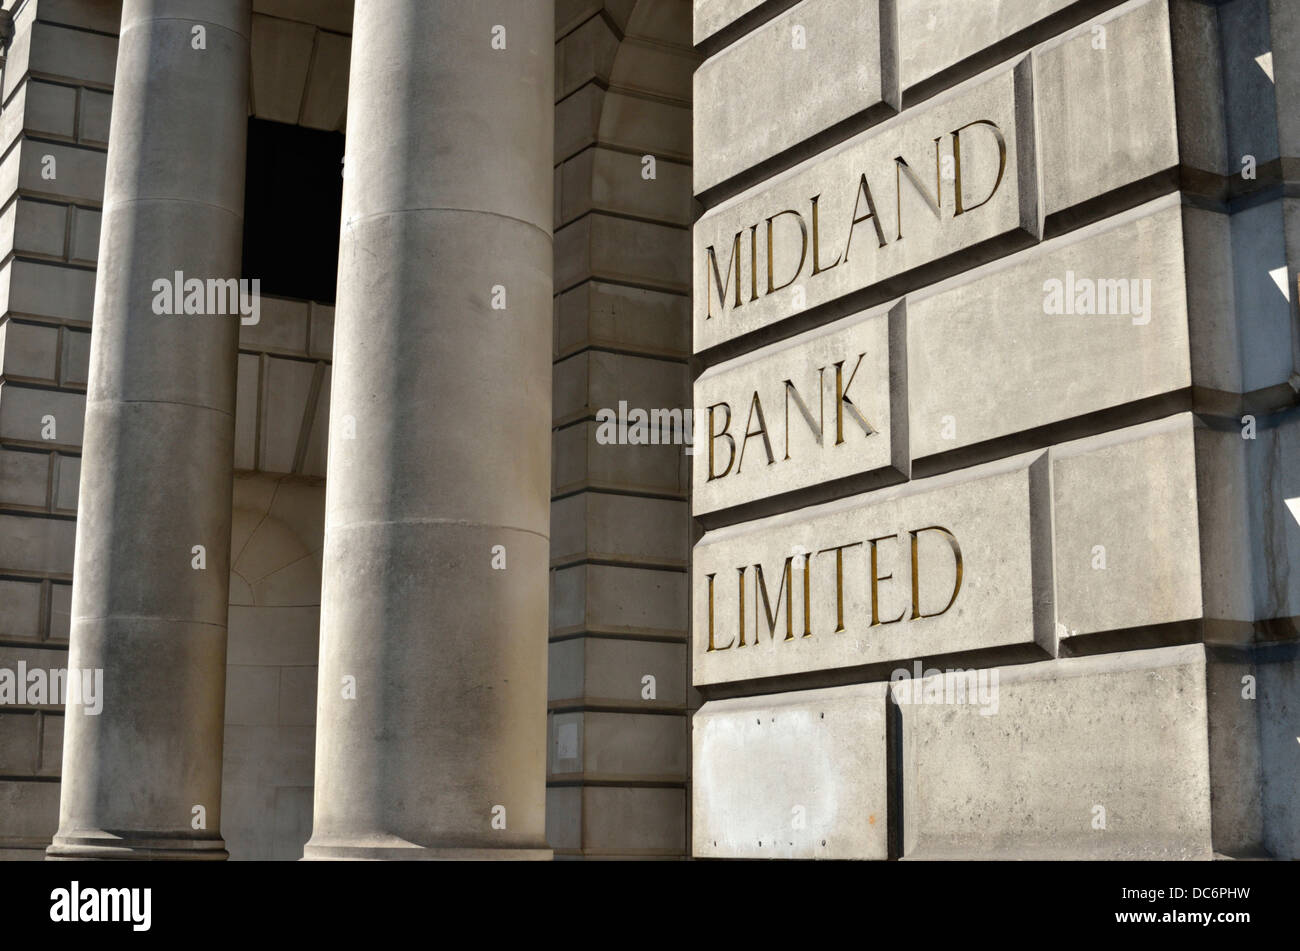 Midland Bank Grade I listed building in Poultry, City of London, London, UK. Stock Photo